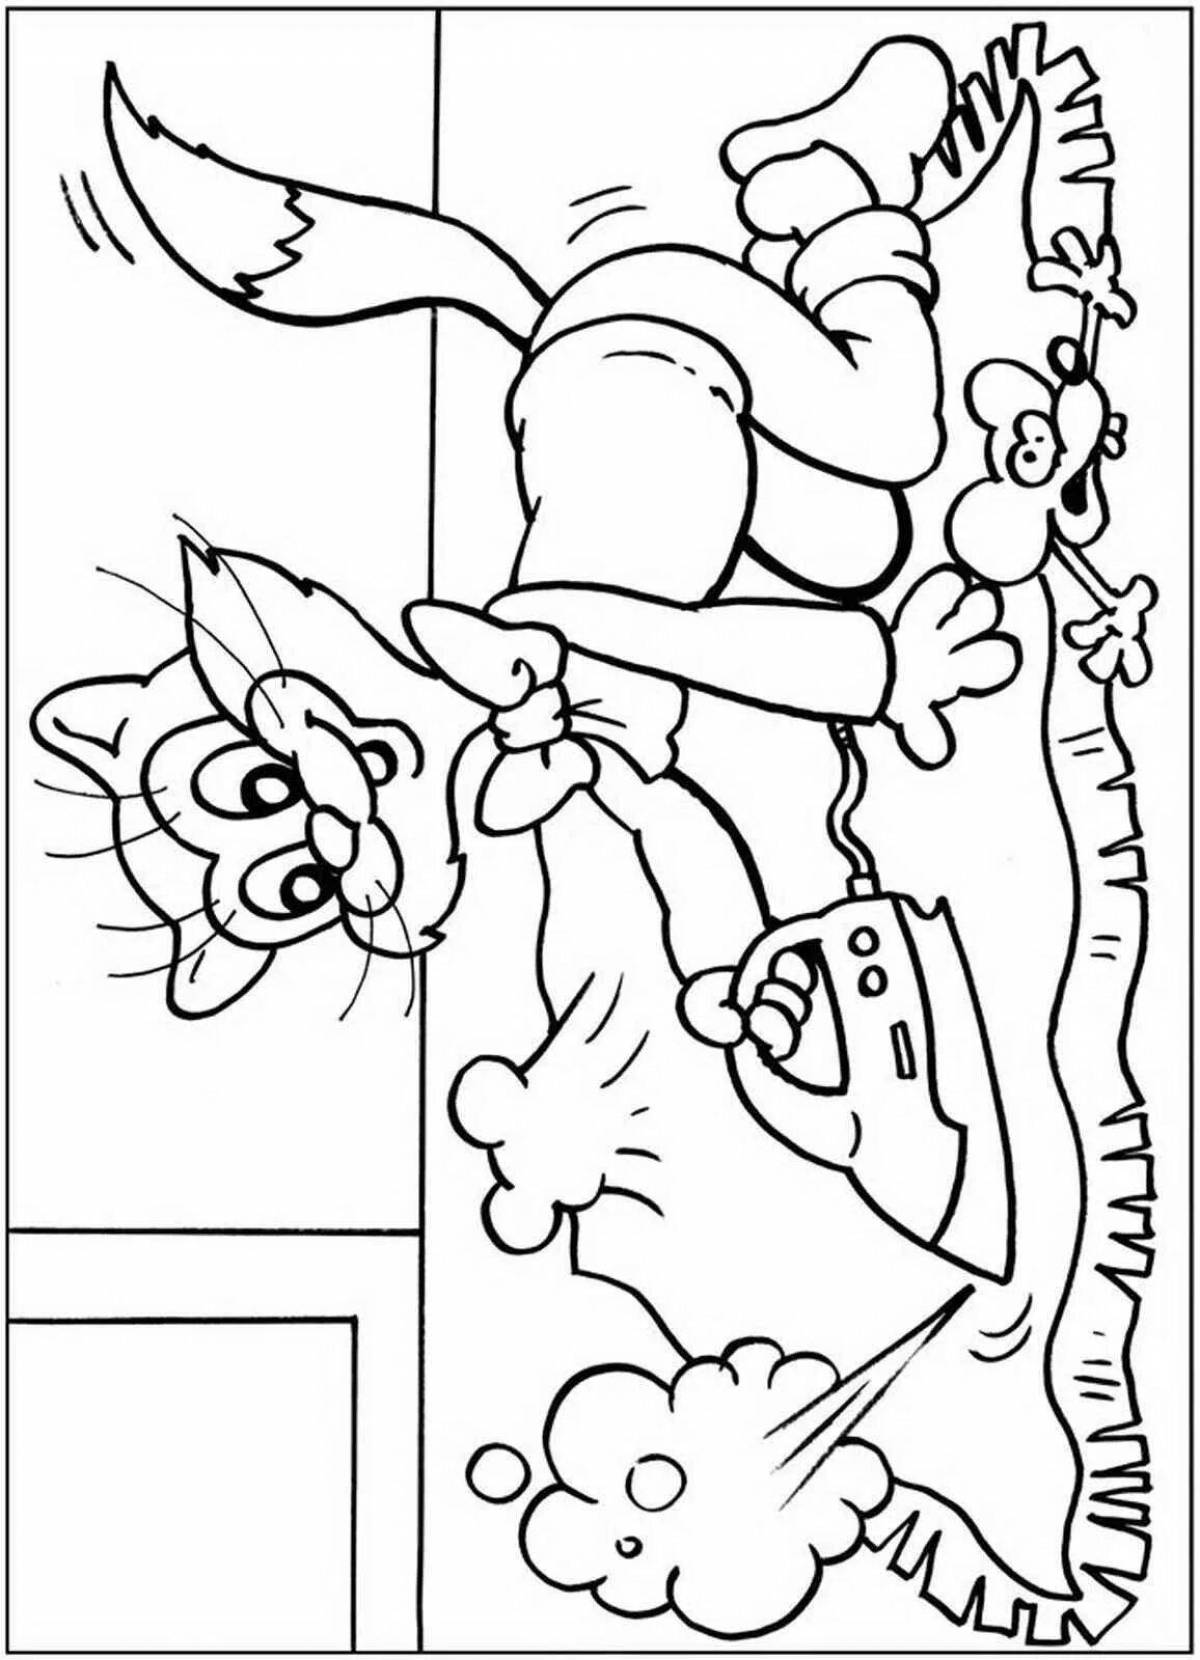 Coloring book cheerful leopold